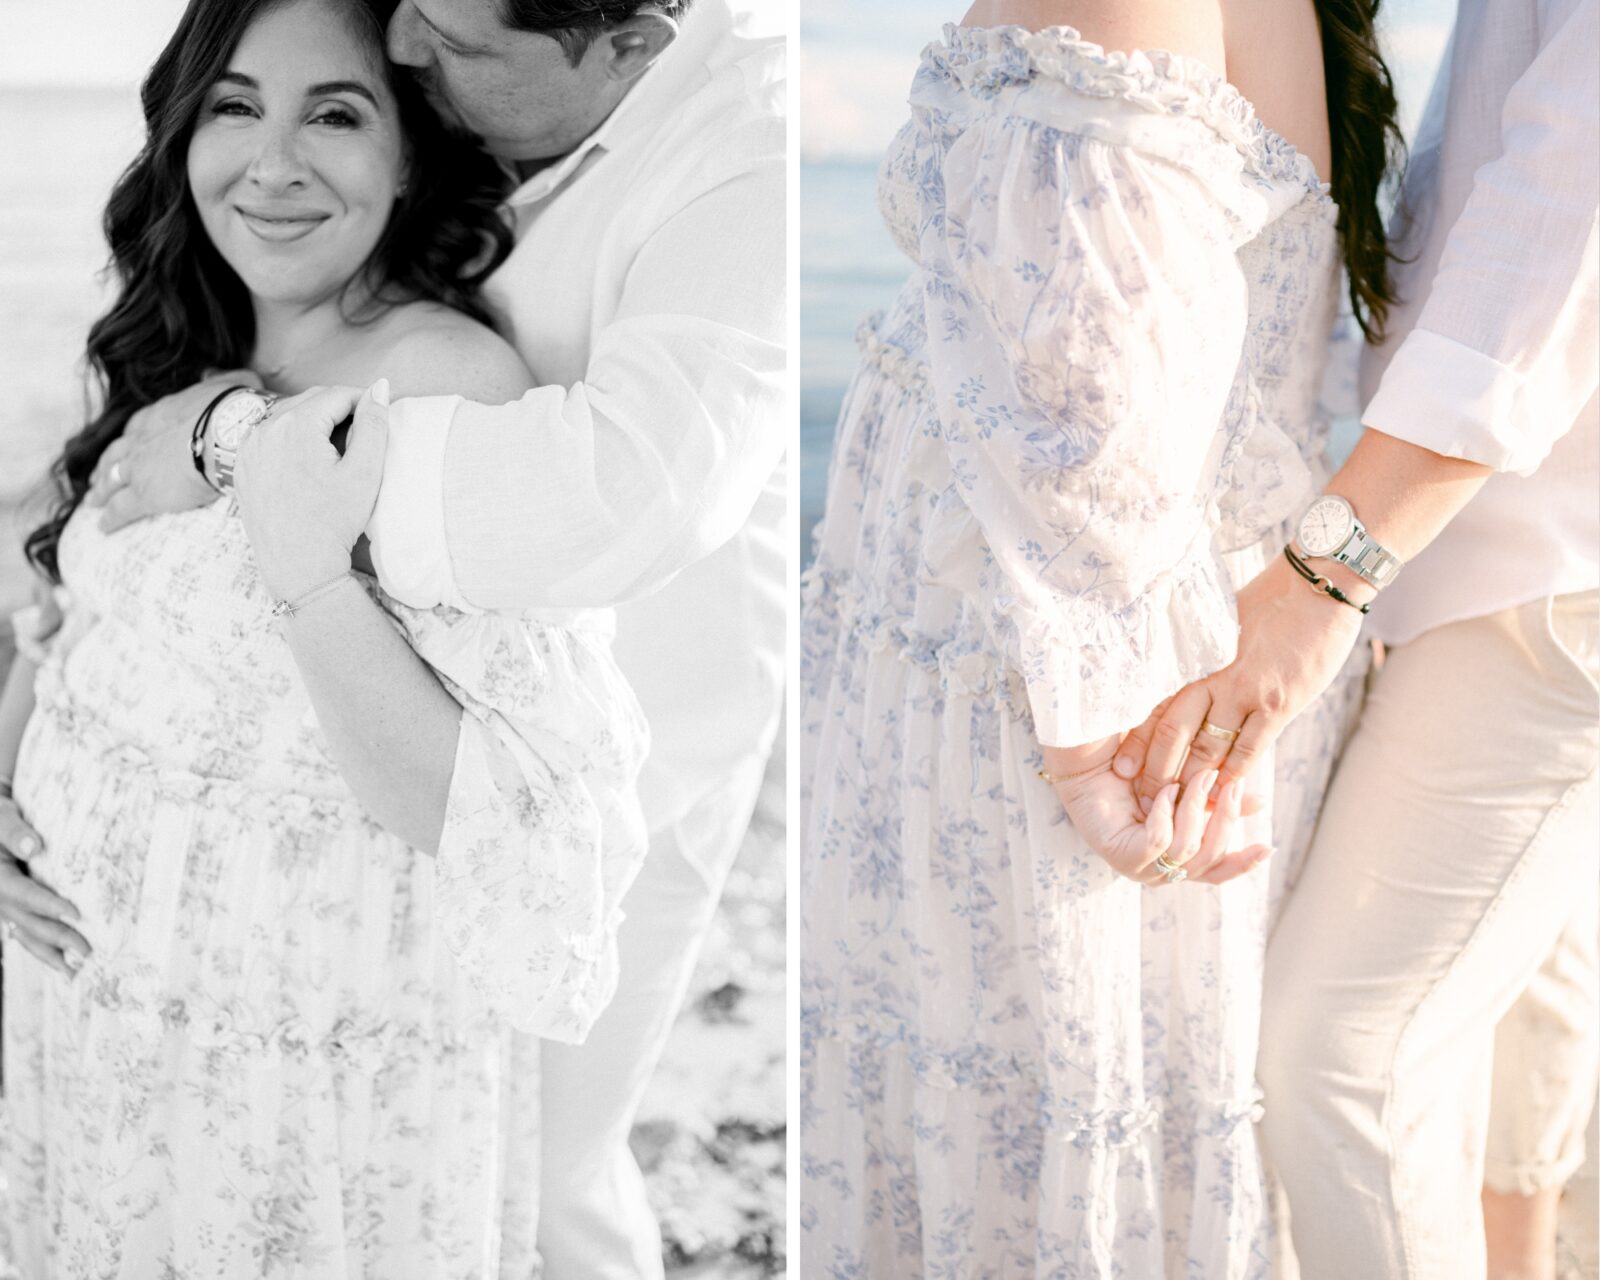 Details of a maternity photo shoot on the beach in Miami